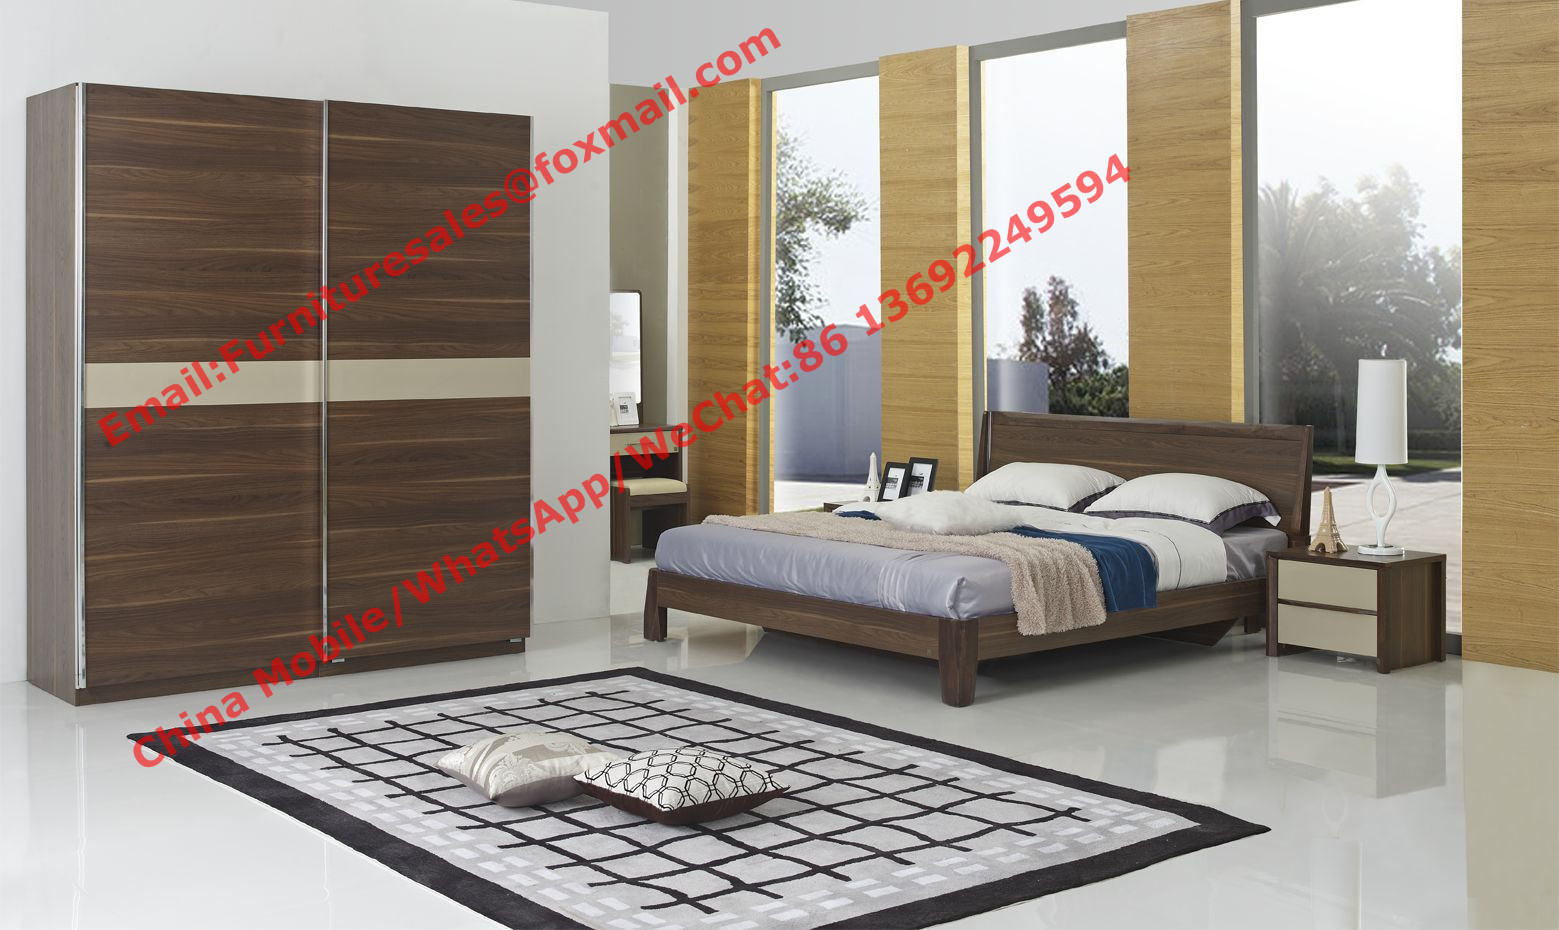 Cheap Fasthotel Furniture bedroom suite by queen size bed and dresser with mirror for sale